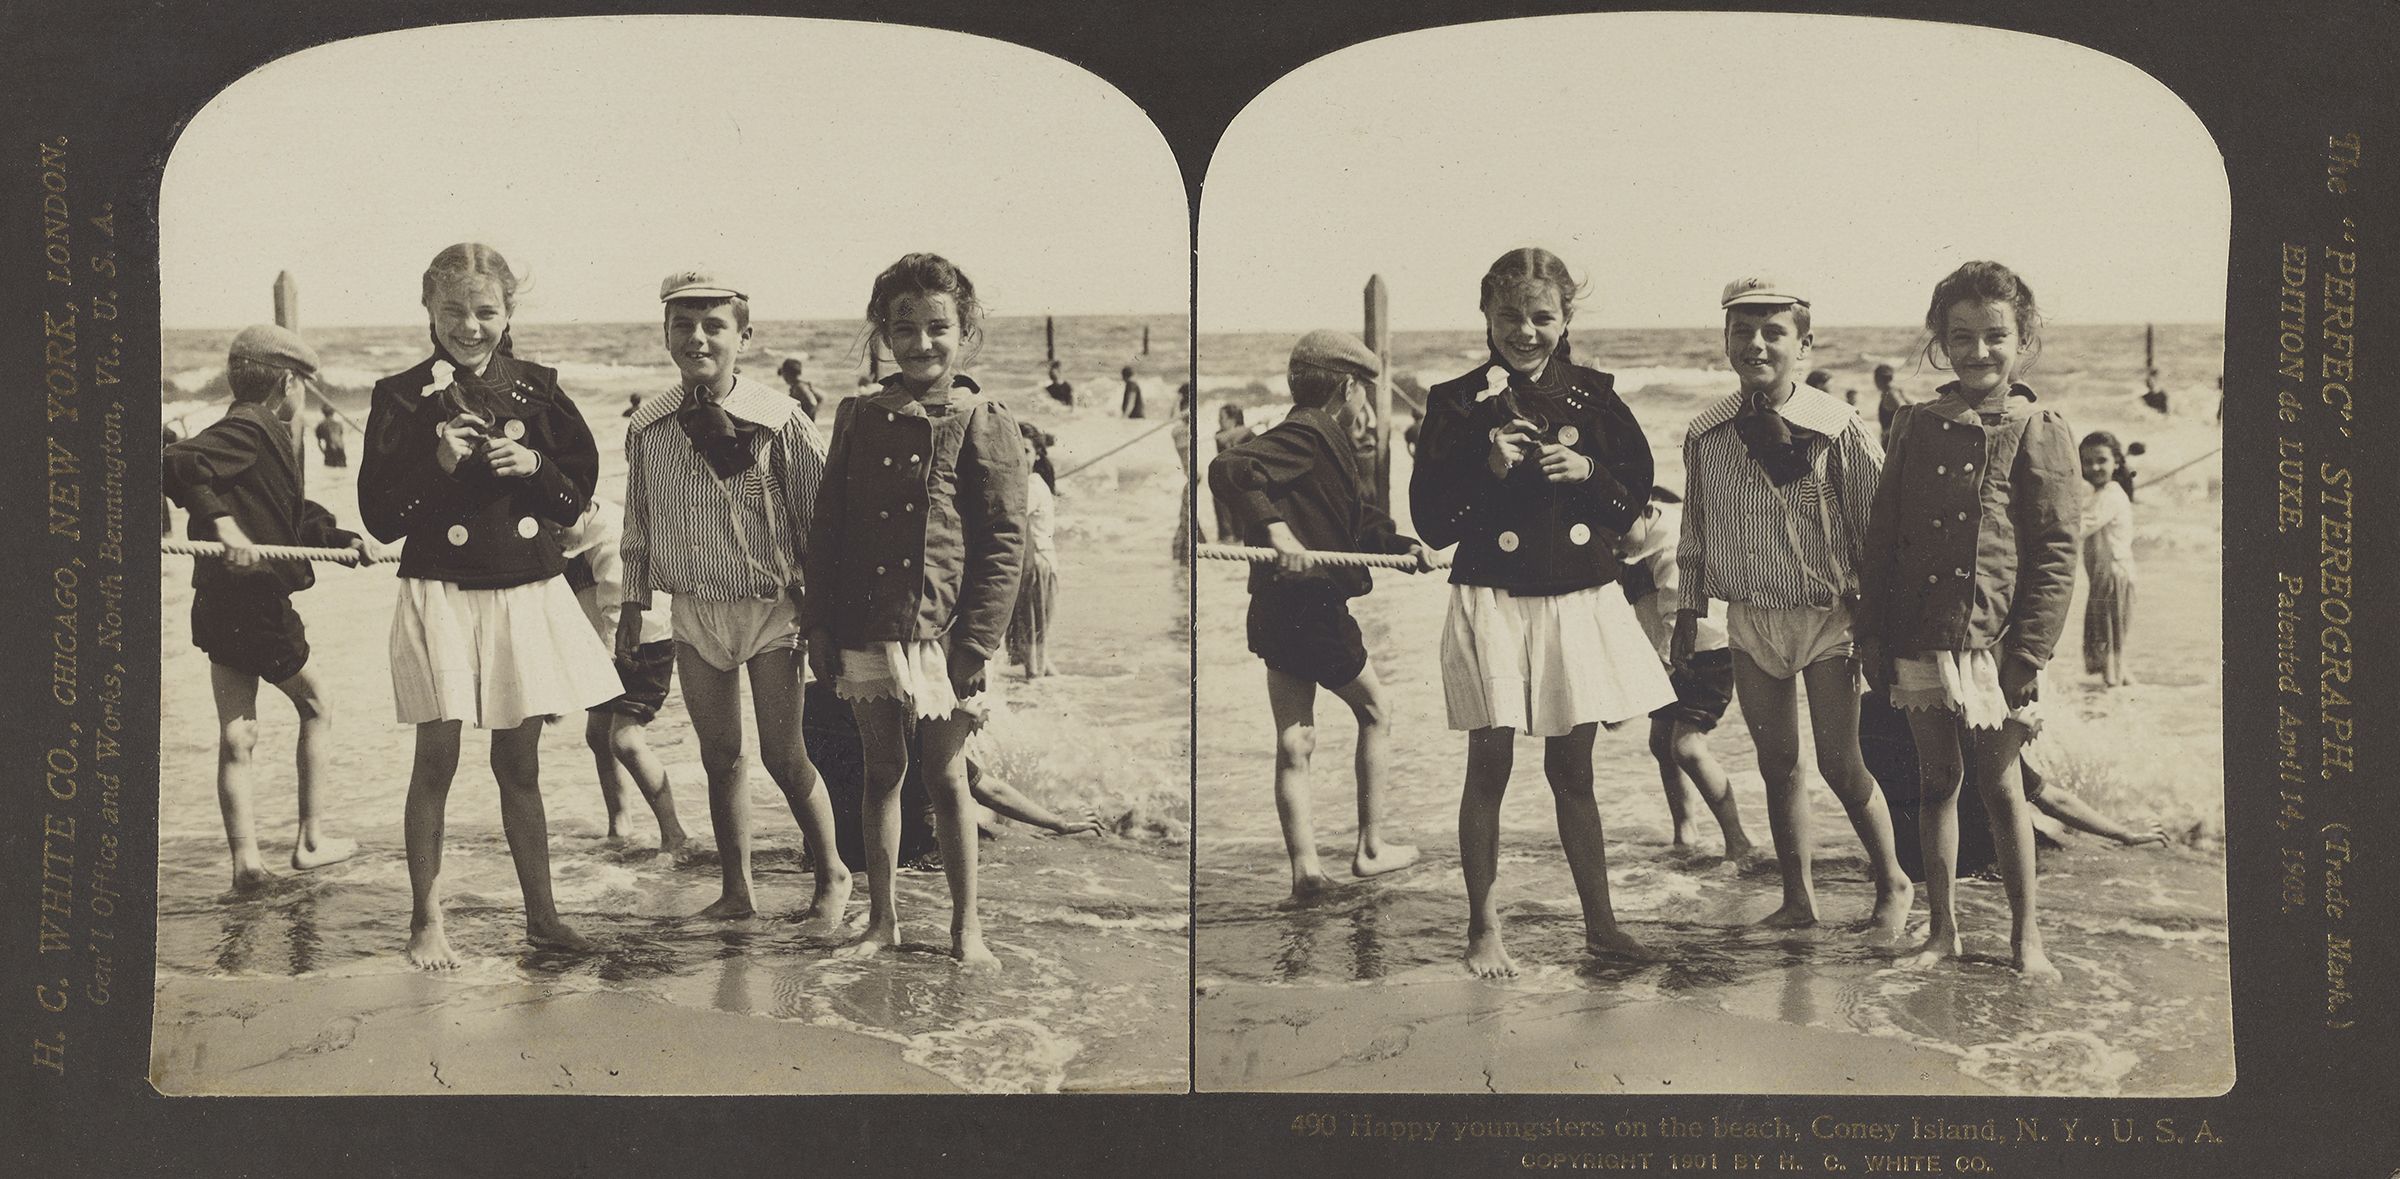 Happy Youngsters on the Beach, Coney Island, NY, Hawley C. White Company, 1901. The J. Paul Getty Museum. Digital image courtesy the Getty’s Open Content Program.